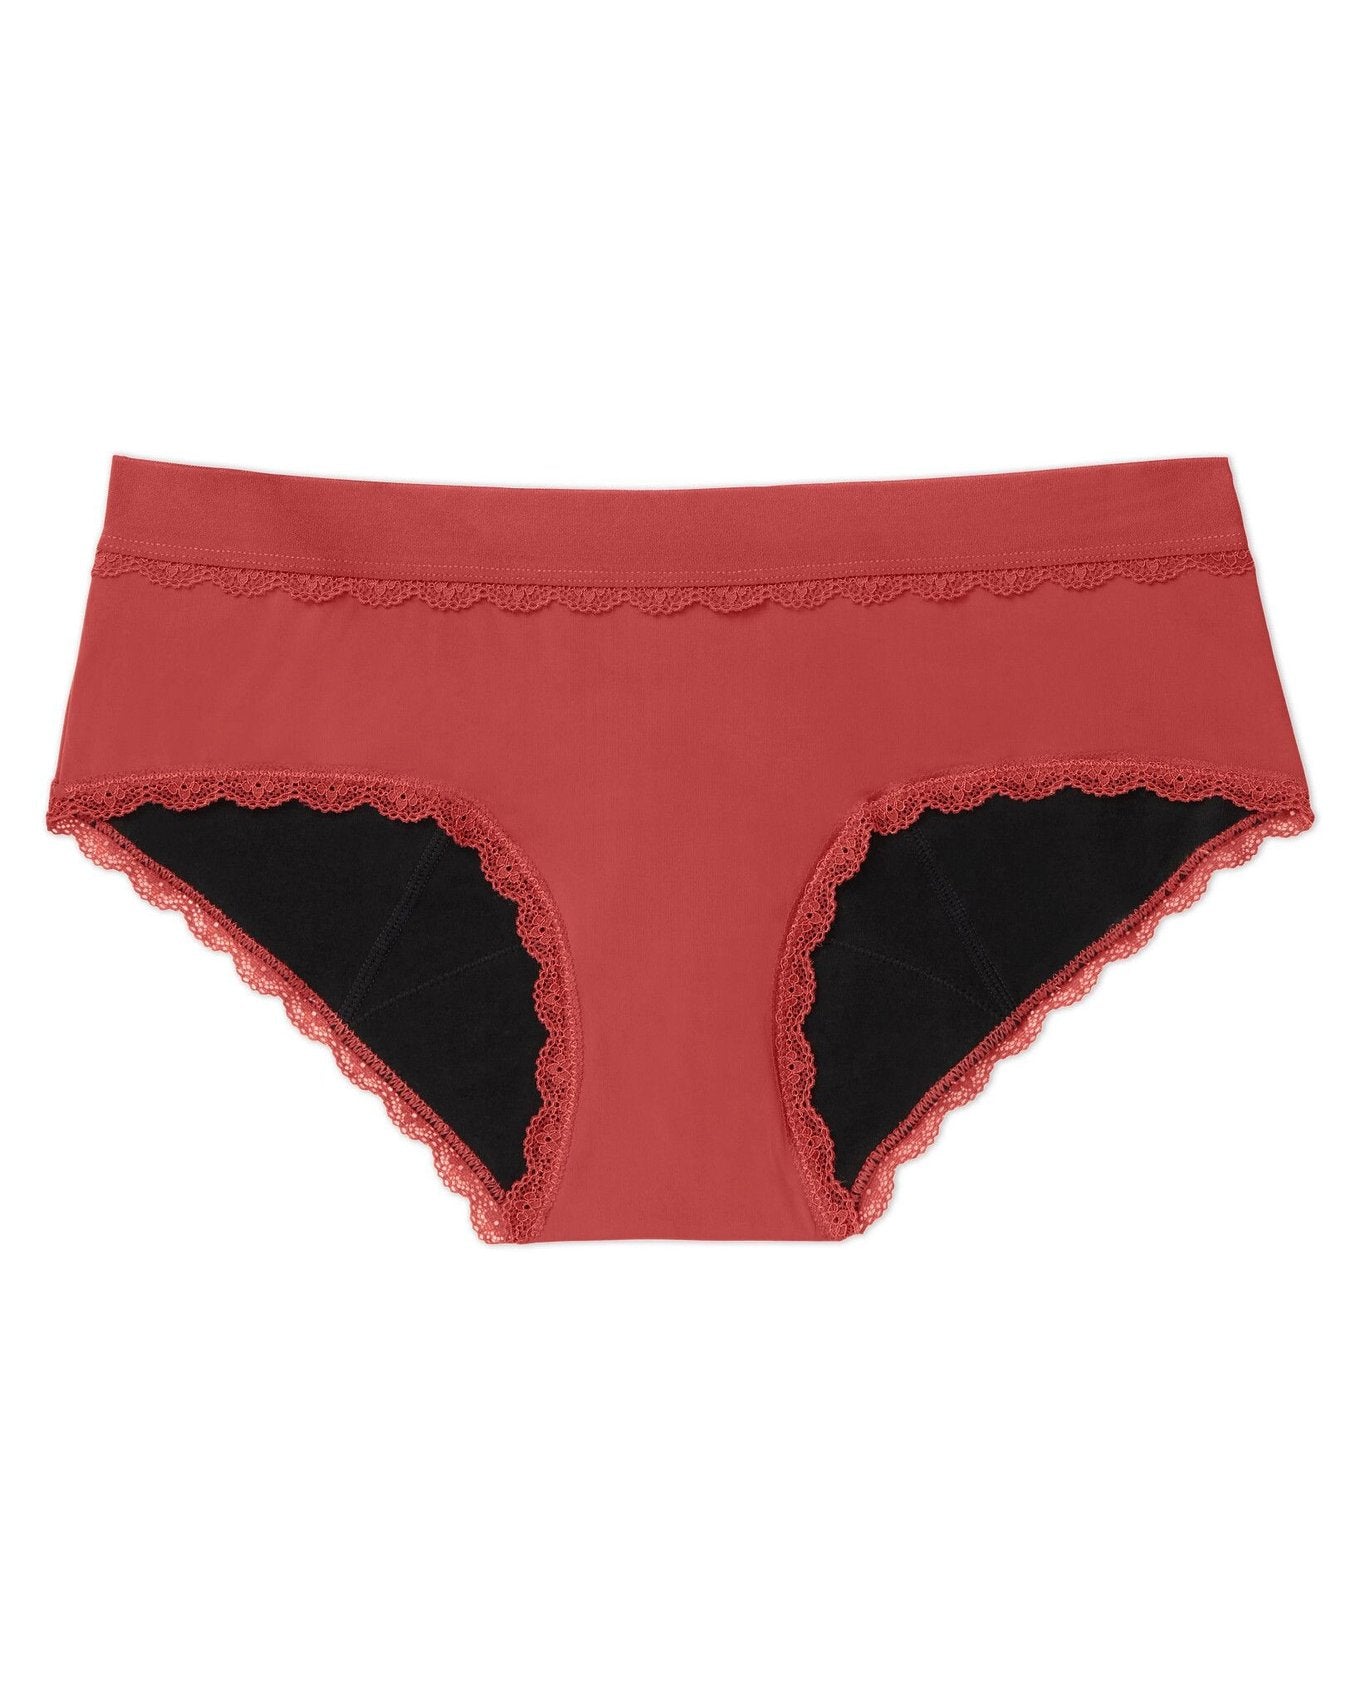 Joyja Olivia period-proof panty in color Baked Apple and shape hipster